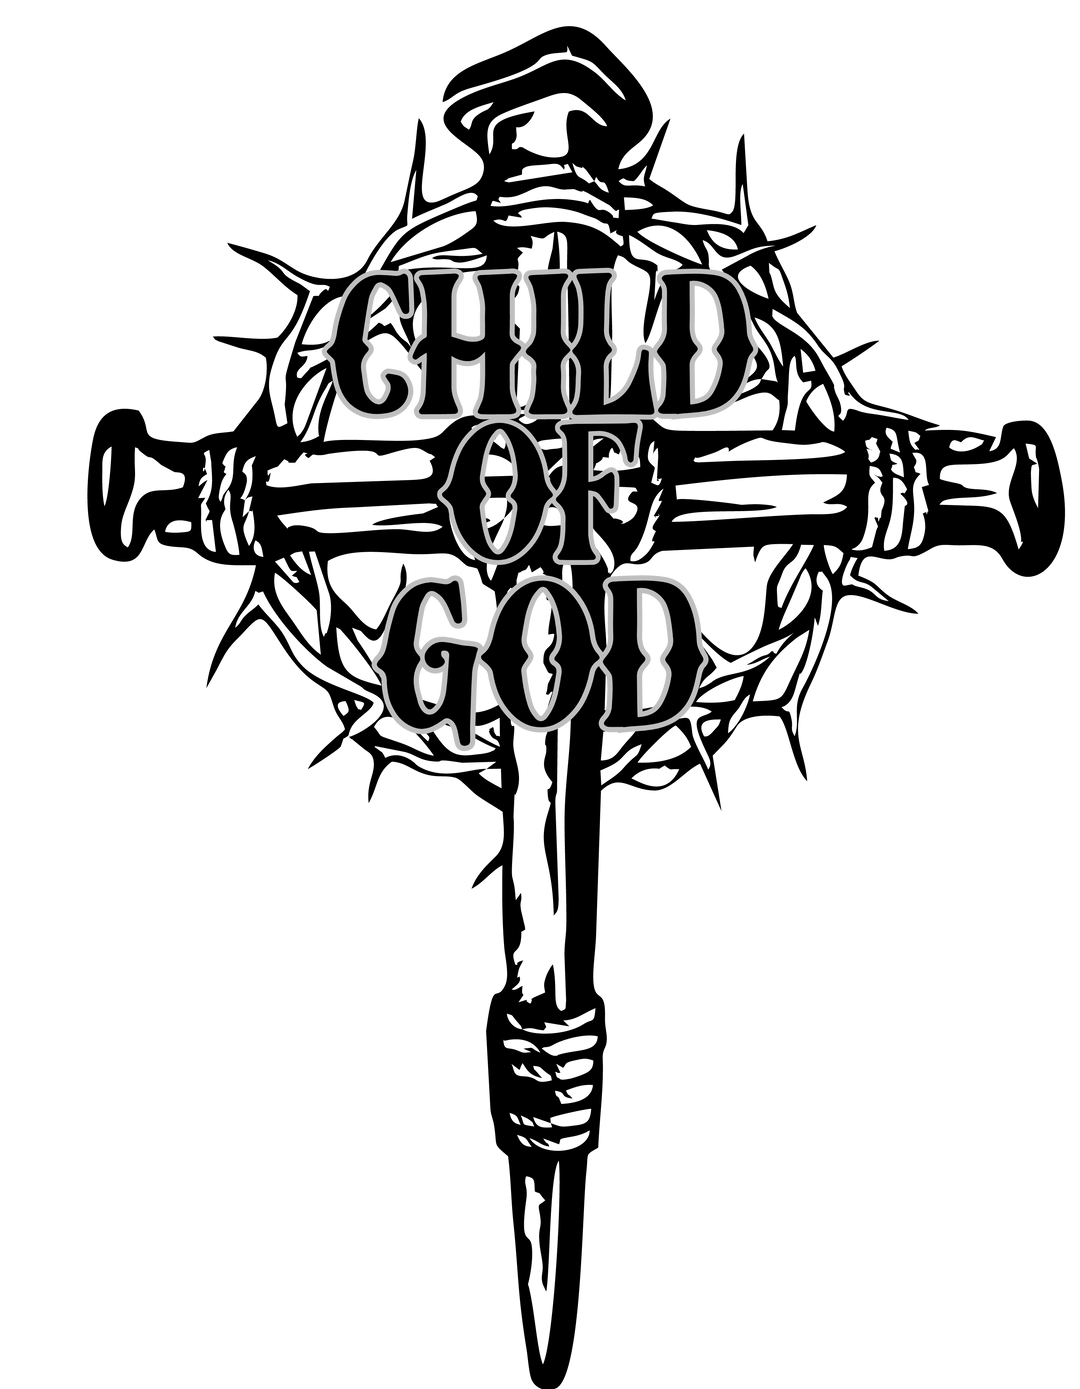 Child of God Kids Tee with black and white text and logos on a screen. 100% cotton tee for kids, light fabric, classic fit, no side seams, and durable twill tape shoulders.